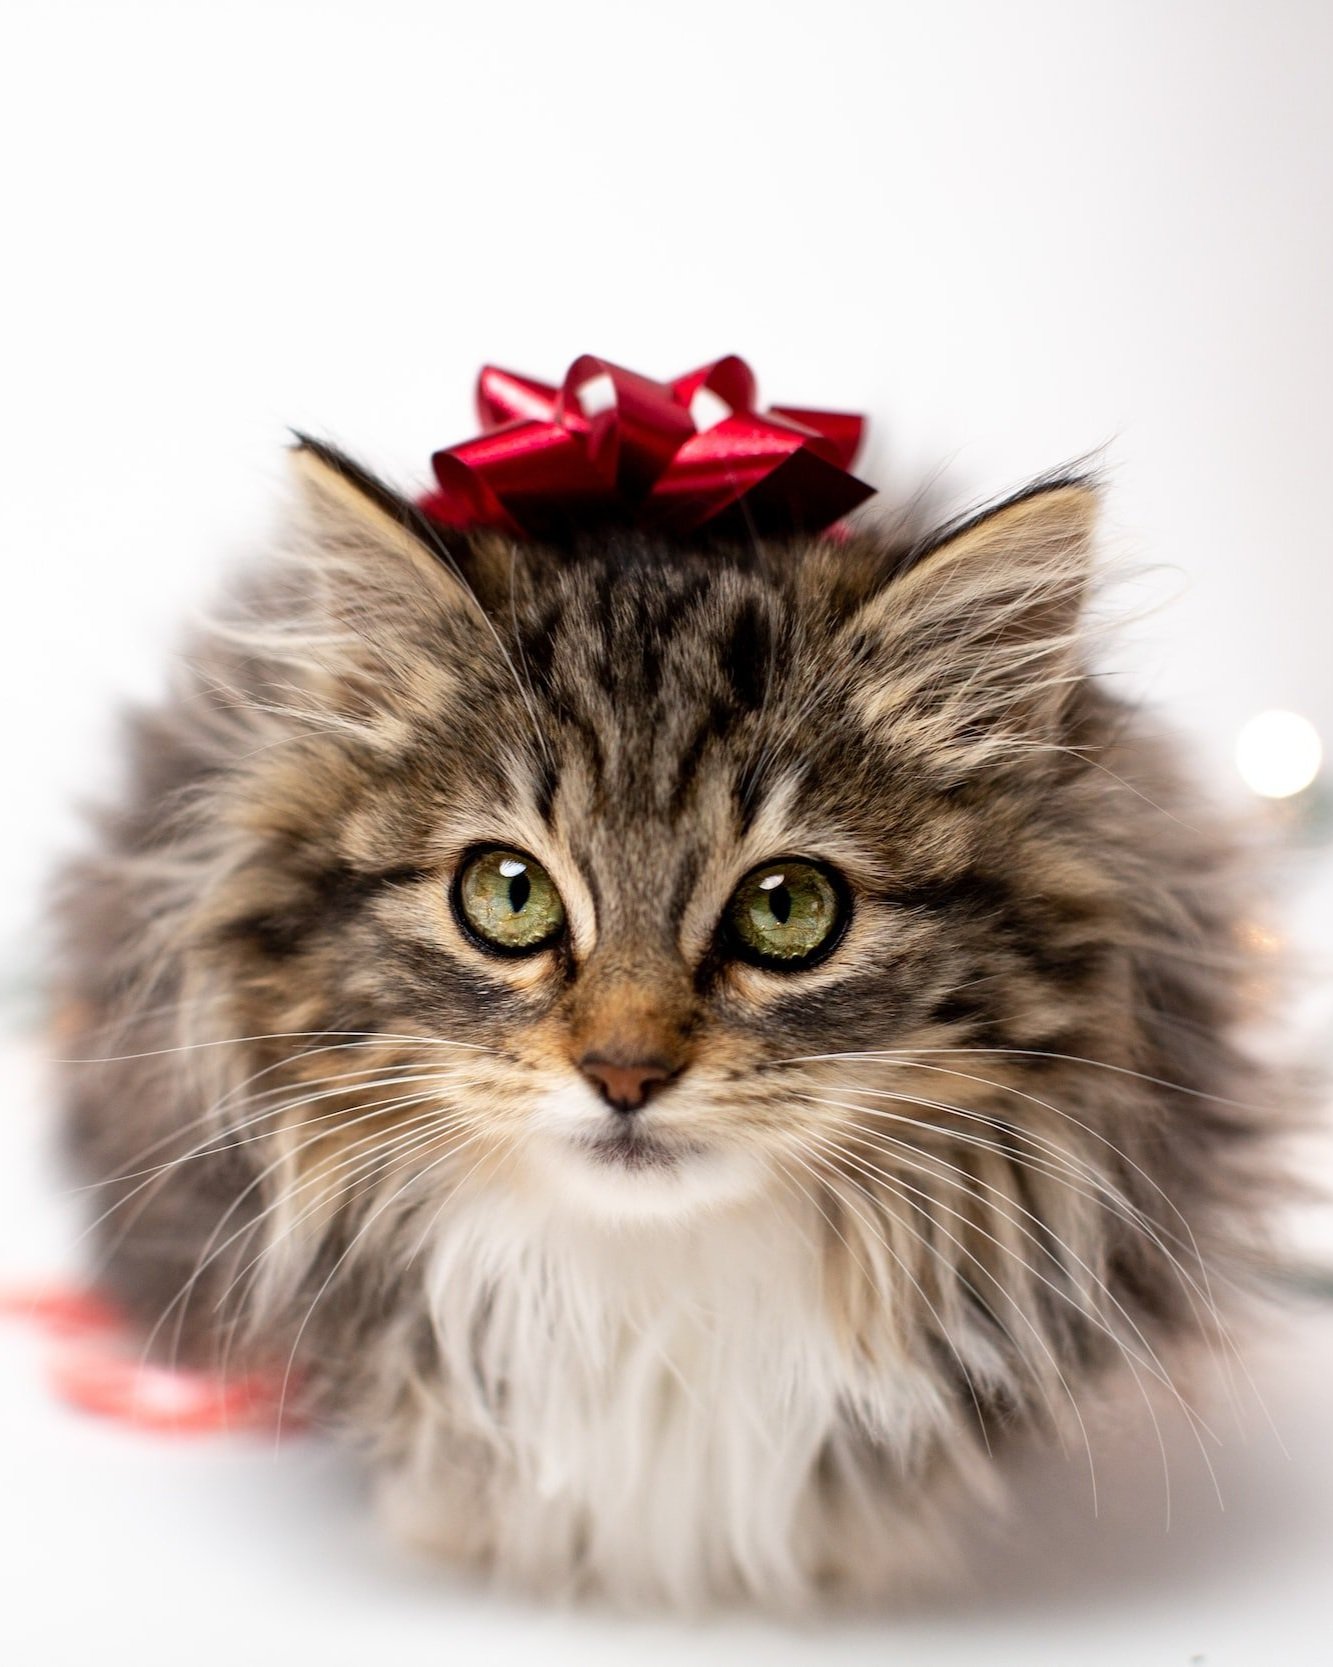 The Best Christmas Presents for Cats 